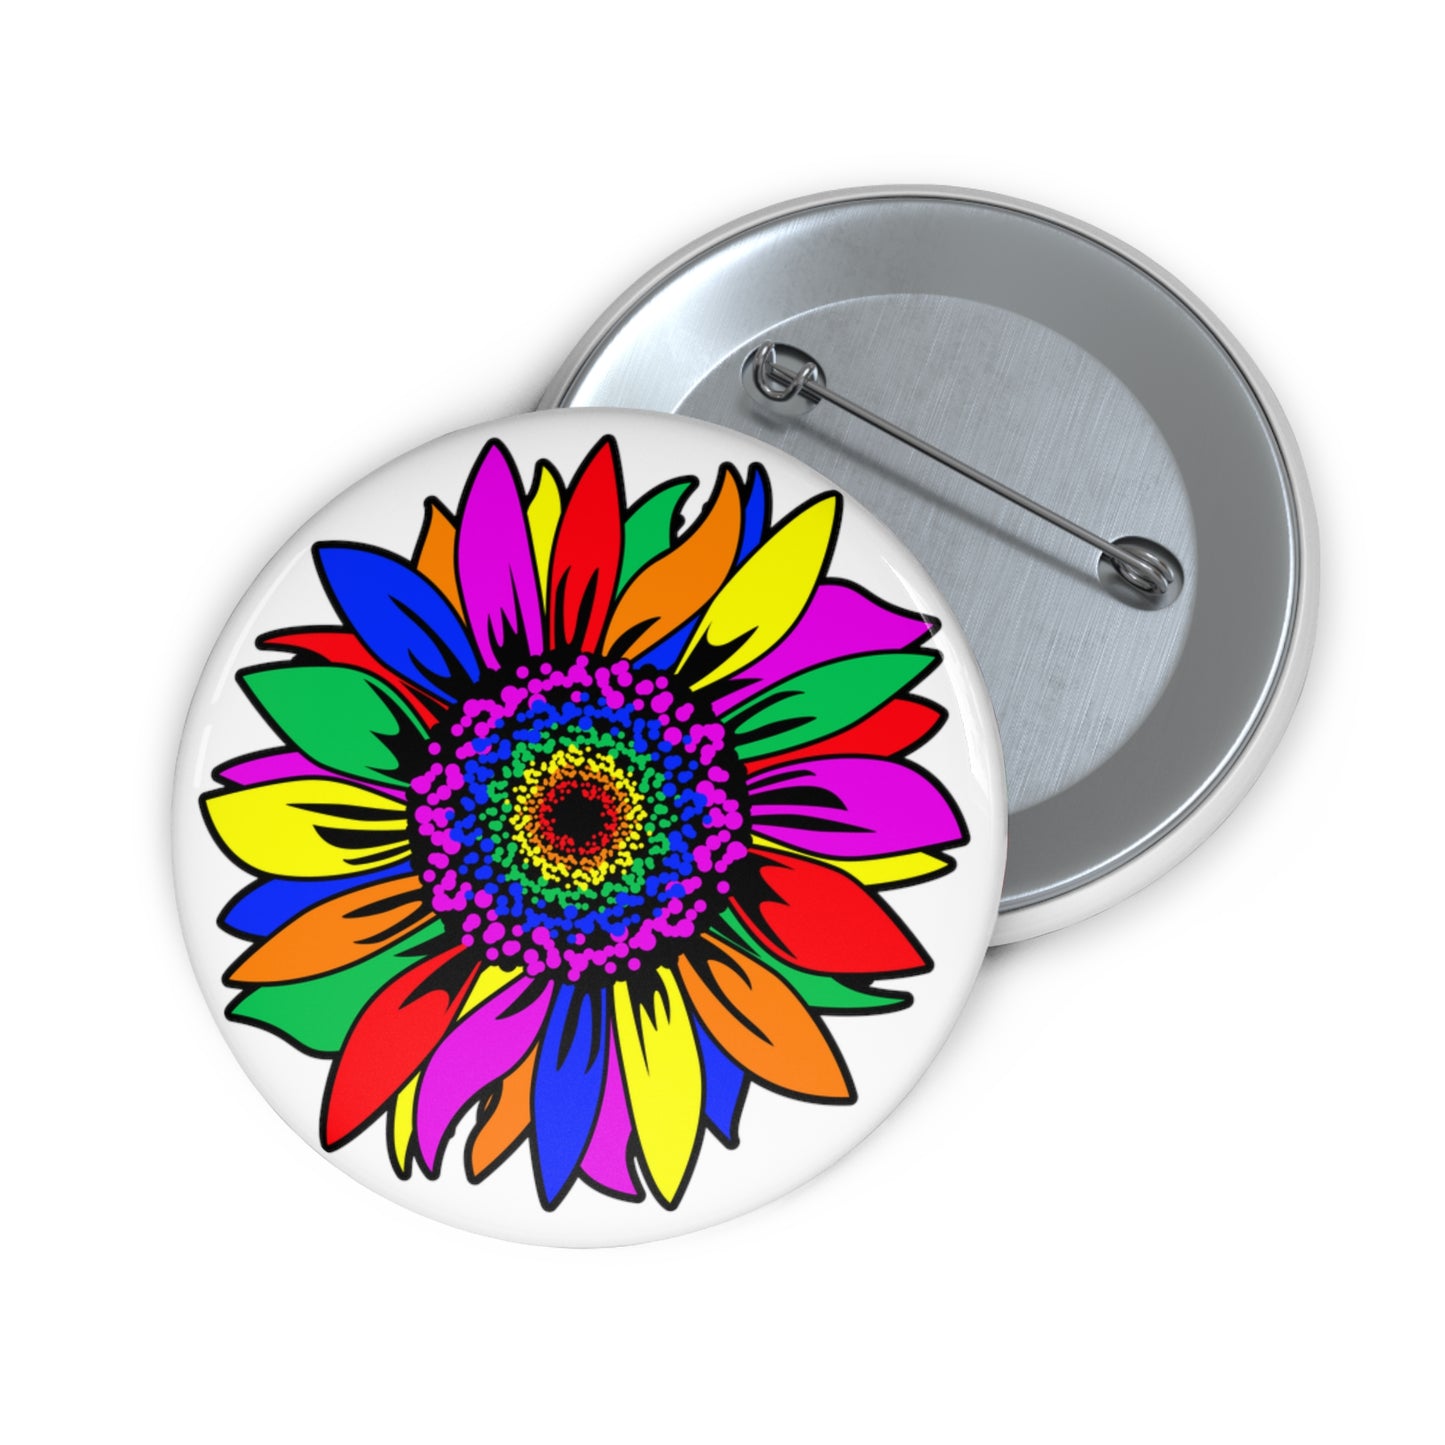 Rainbow Sunflower Buttons: 3 sizes; Pin-back; Metal; Peace